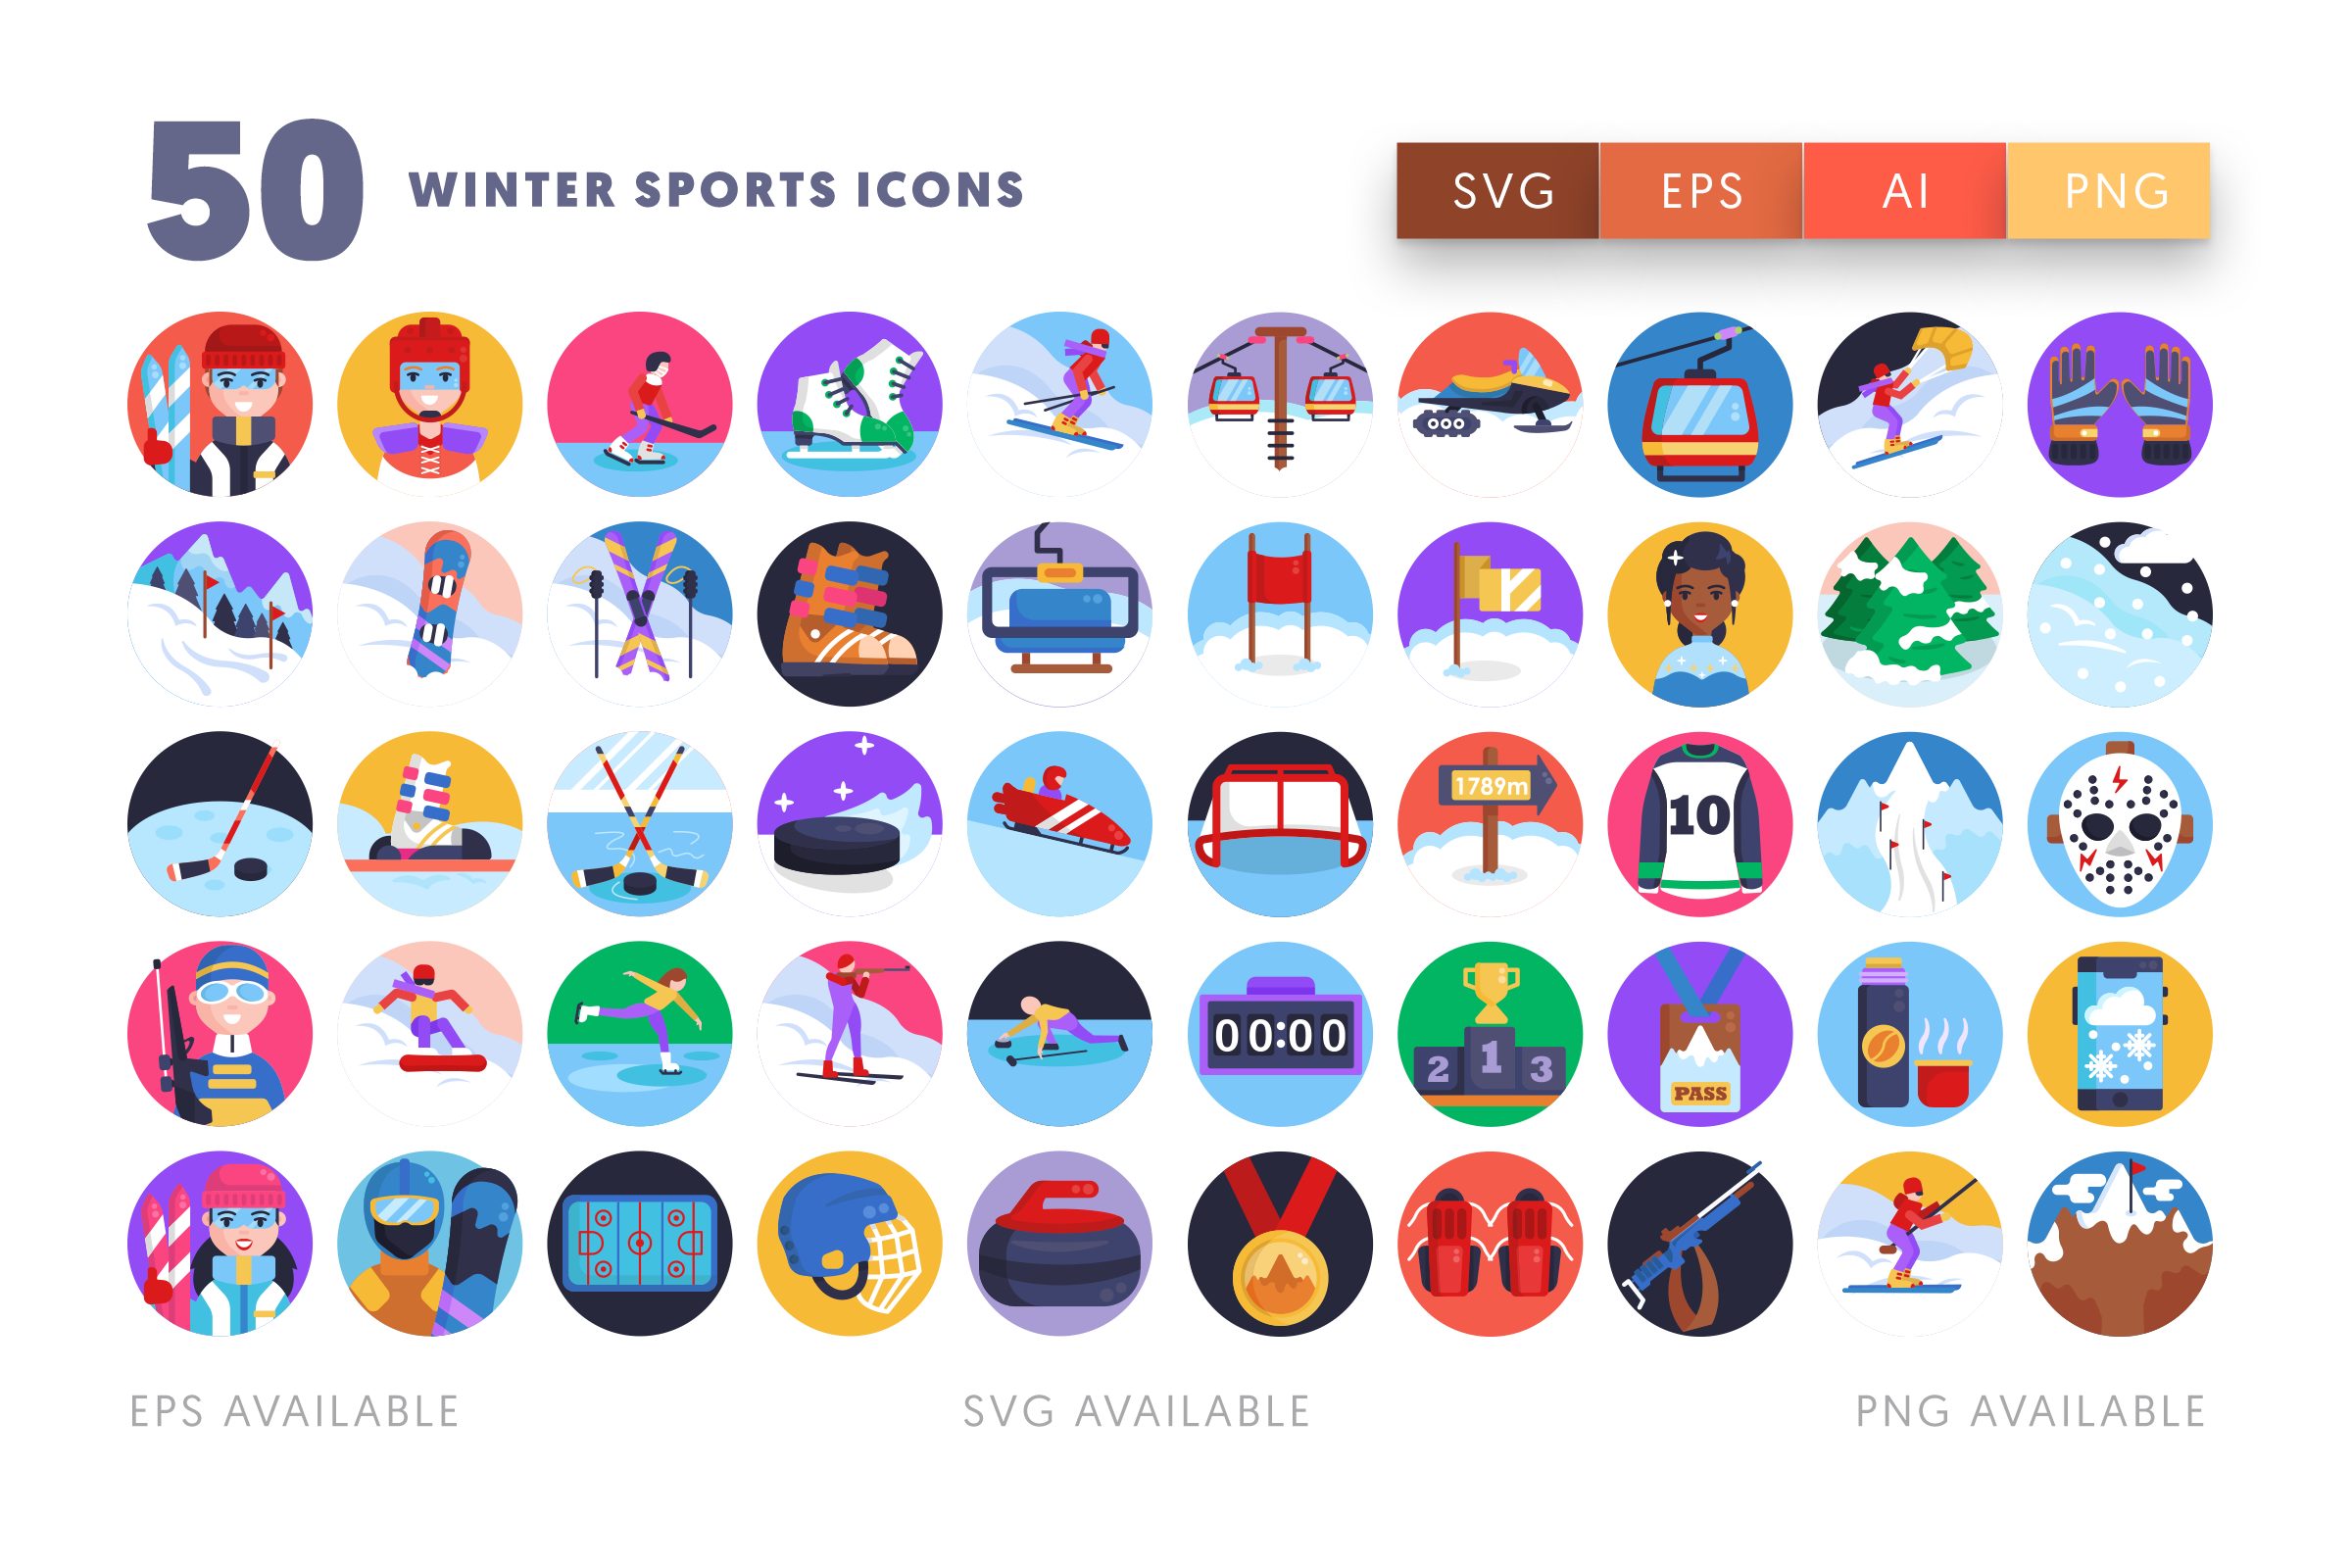 Winter Sports icons png/svg/eps